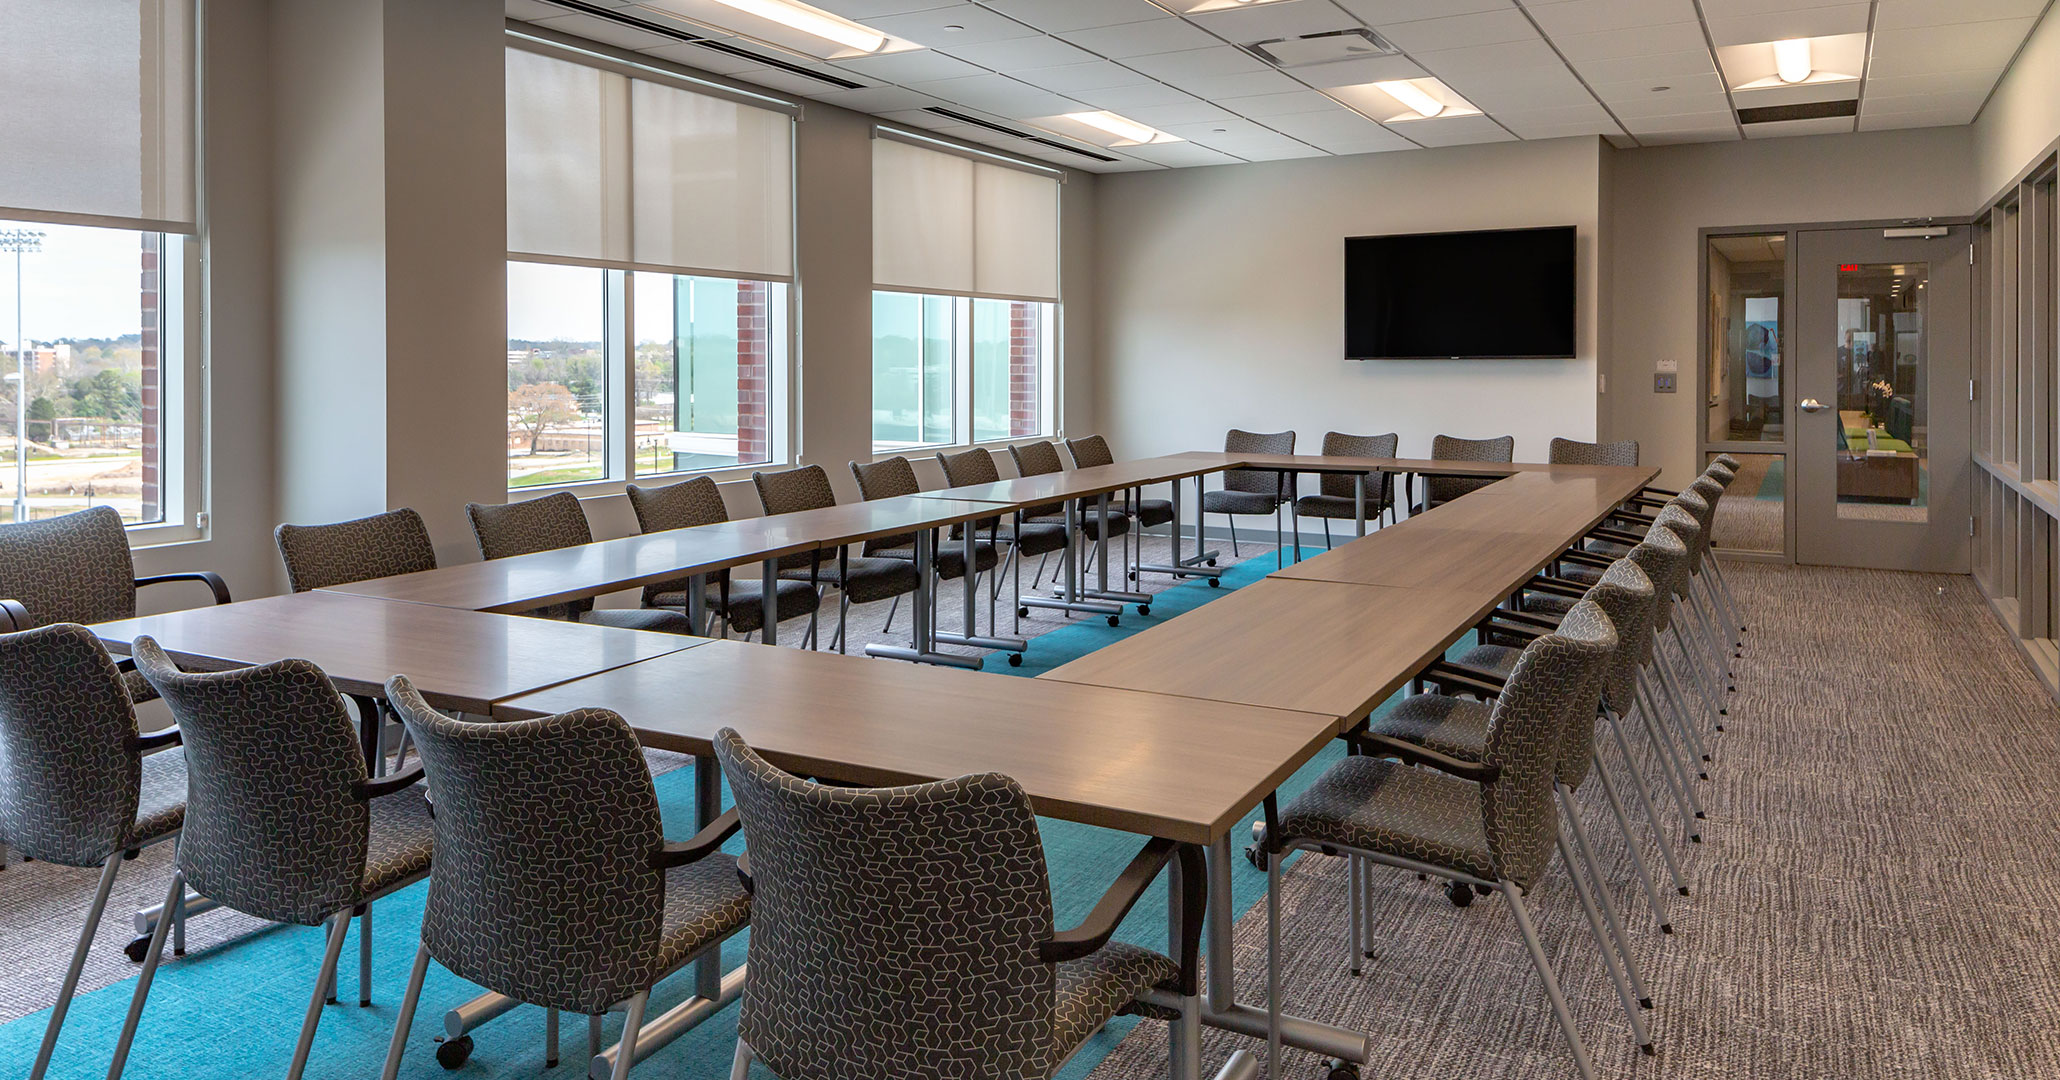 Boudreaux architects worked with the Central Carolina Community Foundation to provide interior design and programming services for their new office space including a technology driven conference room.